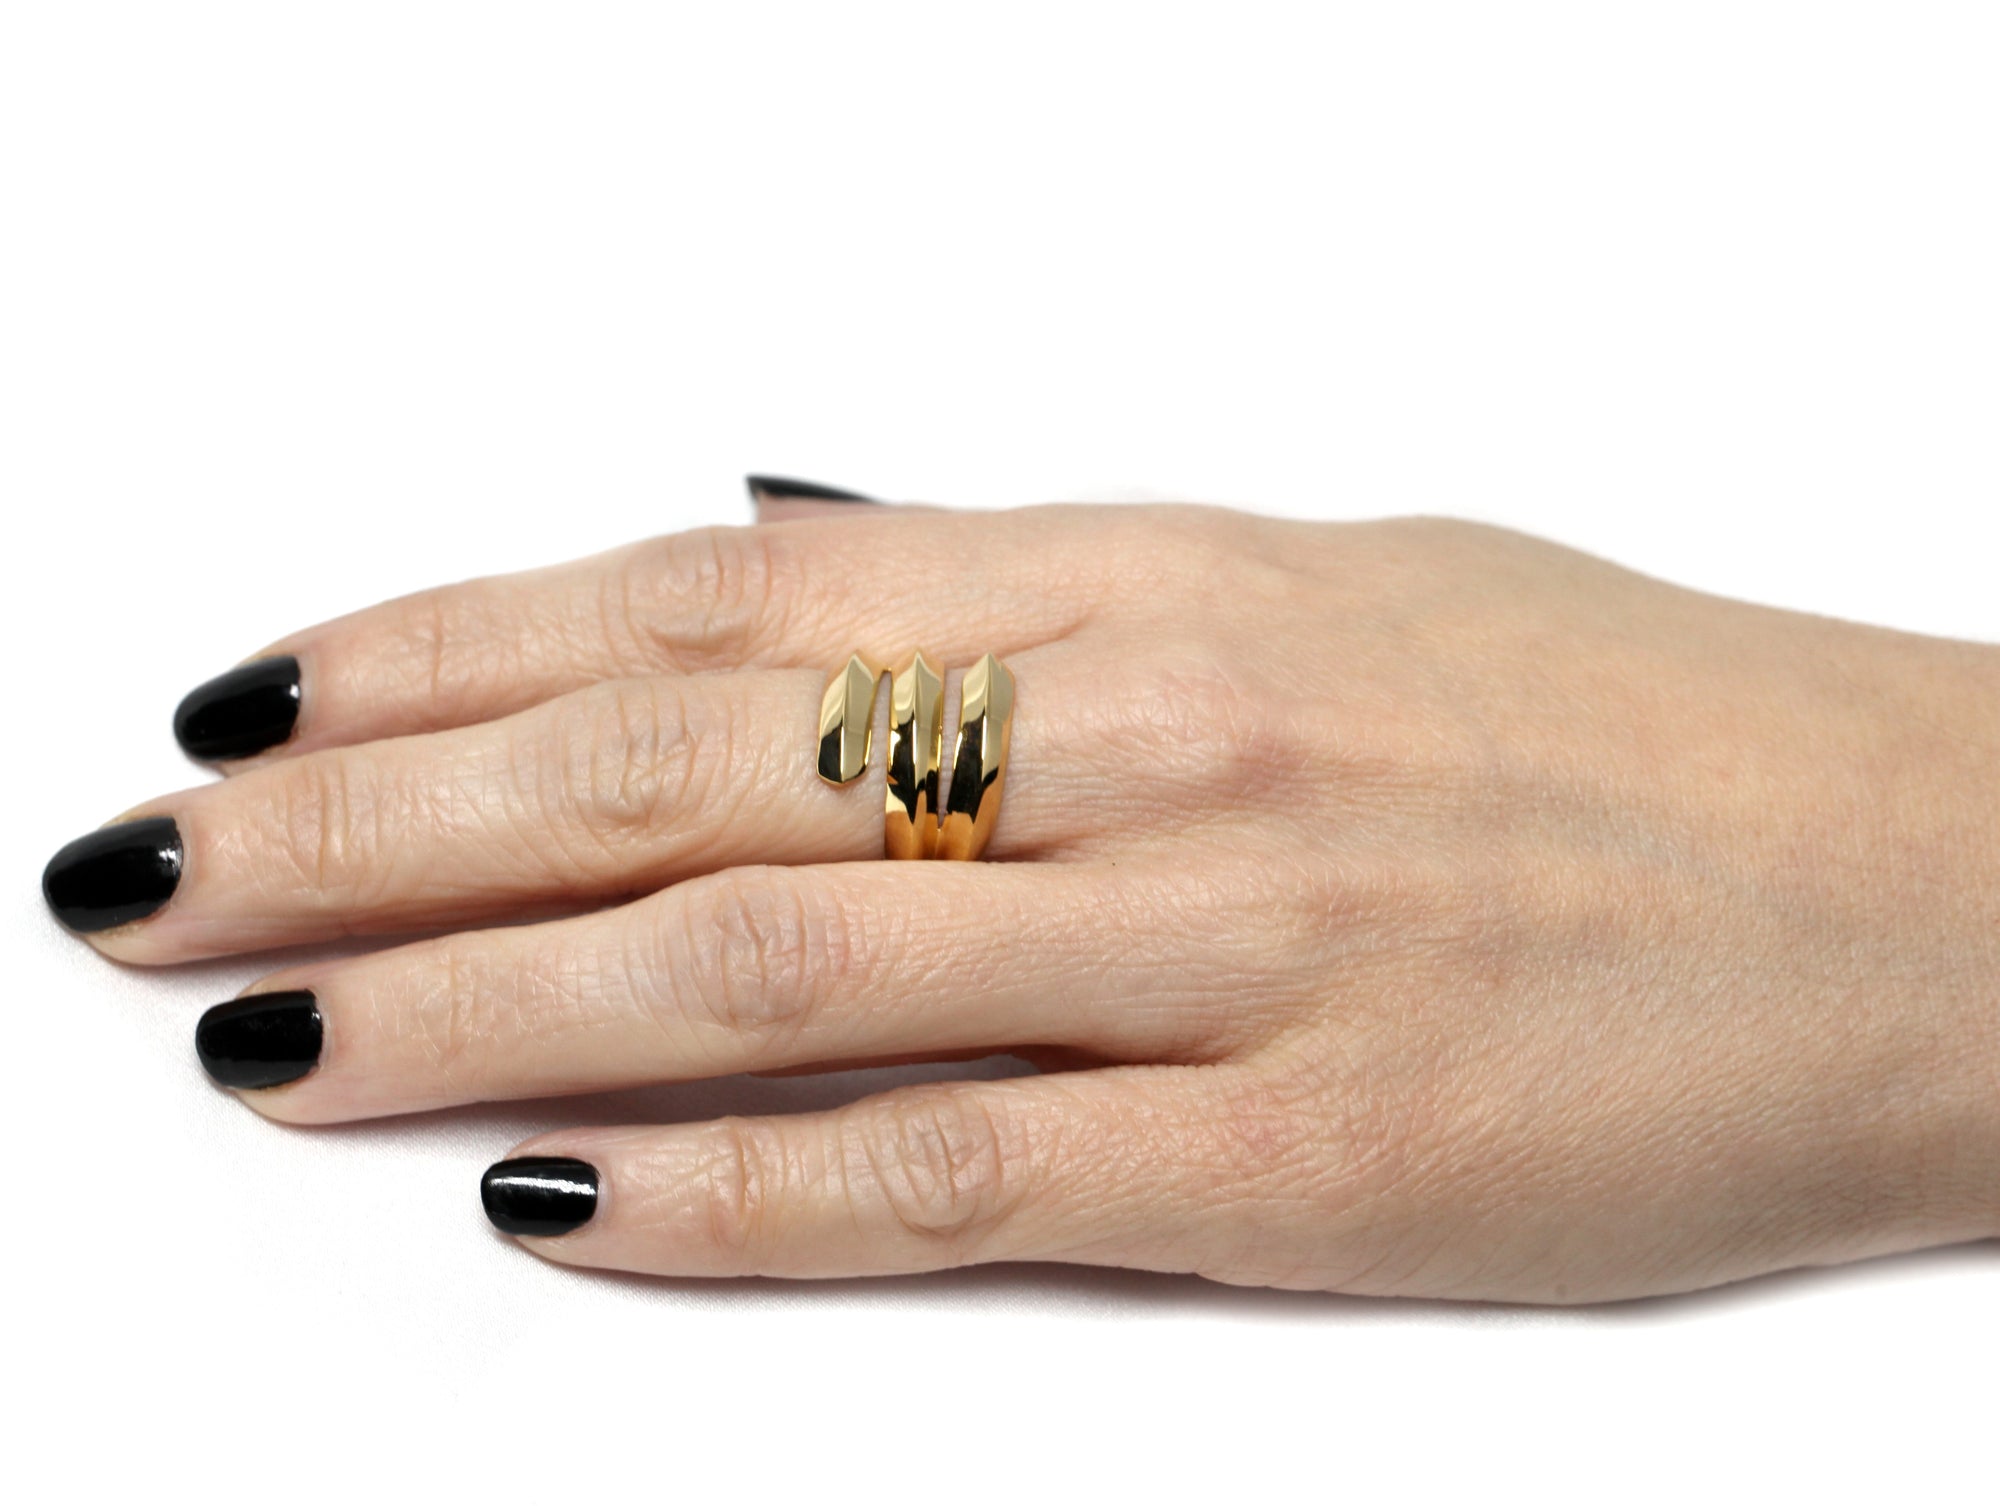 Girl wearing a vermeil gold edgy ring embrace ring silver gold plated fine jewelry custom made in montreal fine jewelry unisex jewelry design montreal made in canada